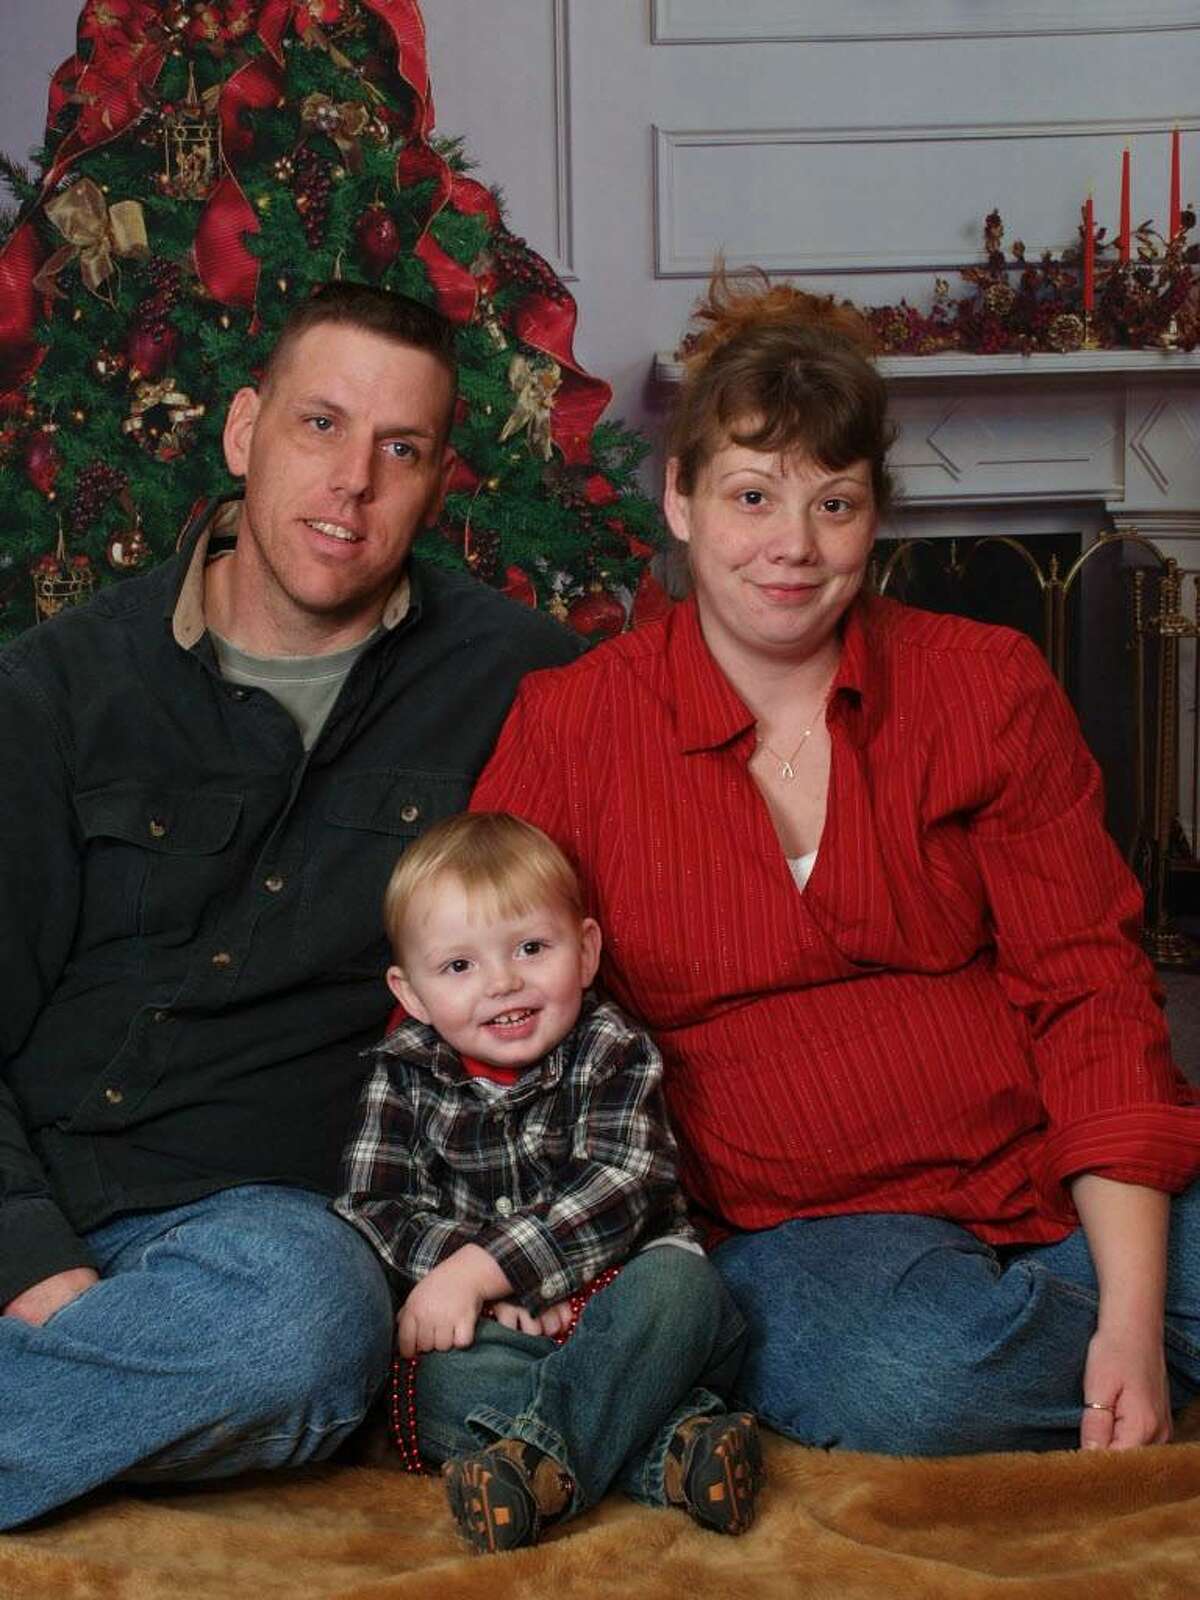 Long-distance trucker Jason Rivenburg of Schoharie County is shown with his wife, Hope, and son Joshua shortly before he was murdered in 2009 while he was parked for the night in his truck in South Carolina. ( Rivenburg family photo )